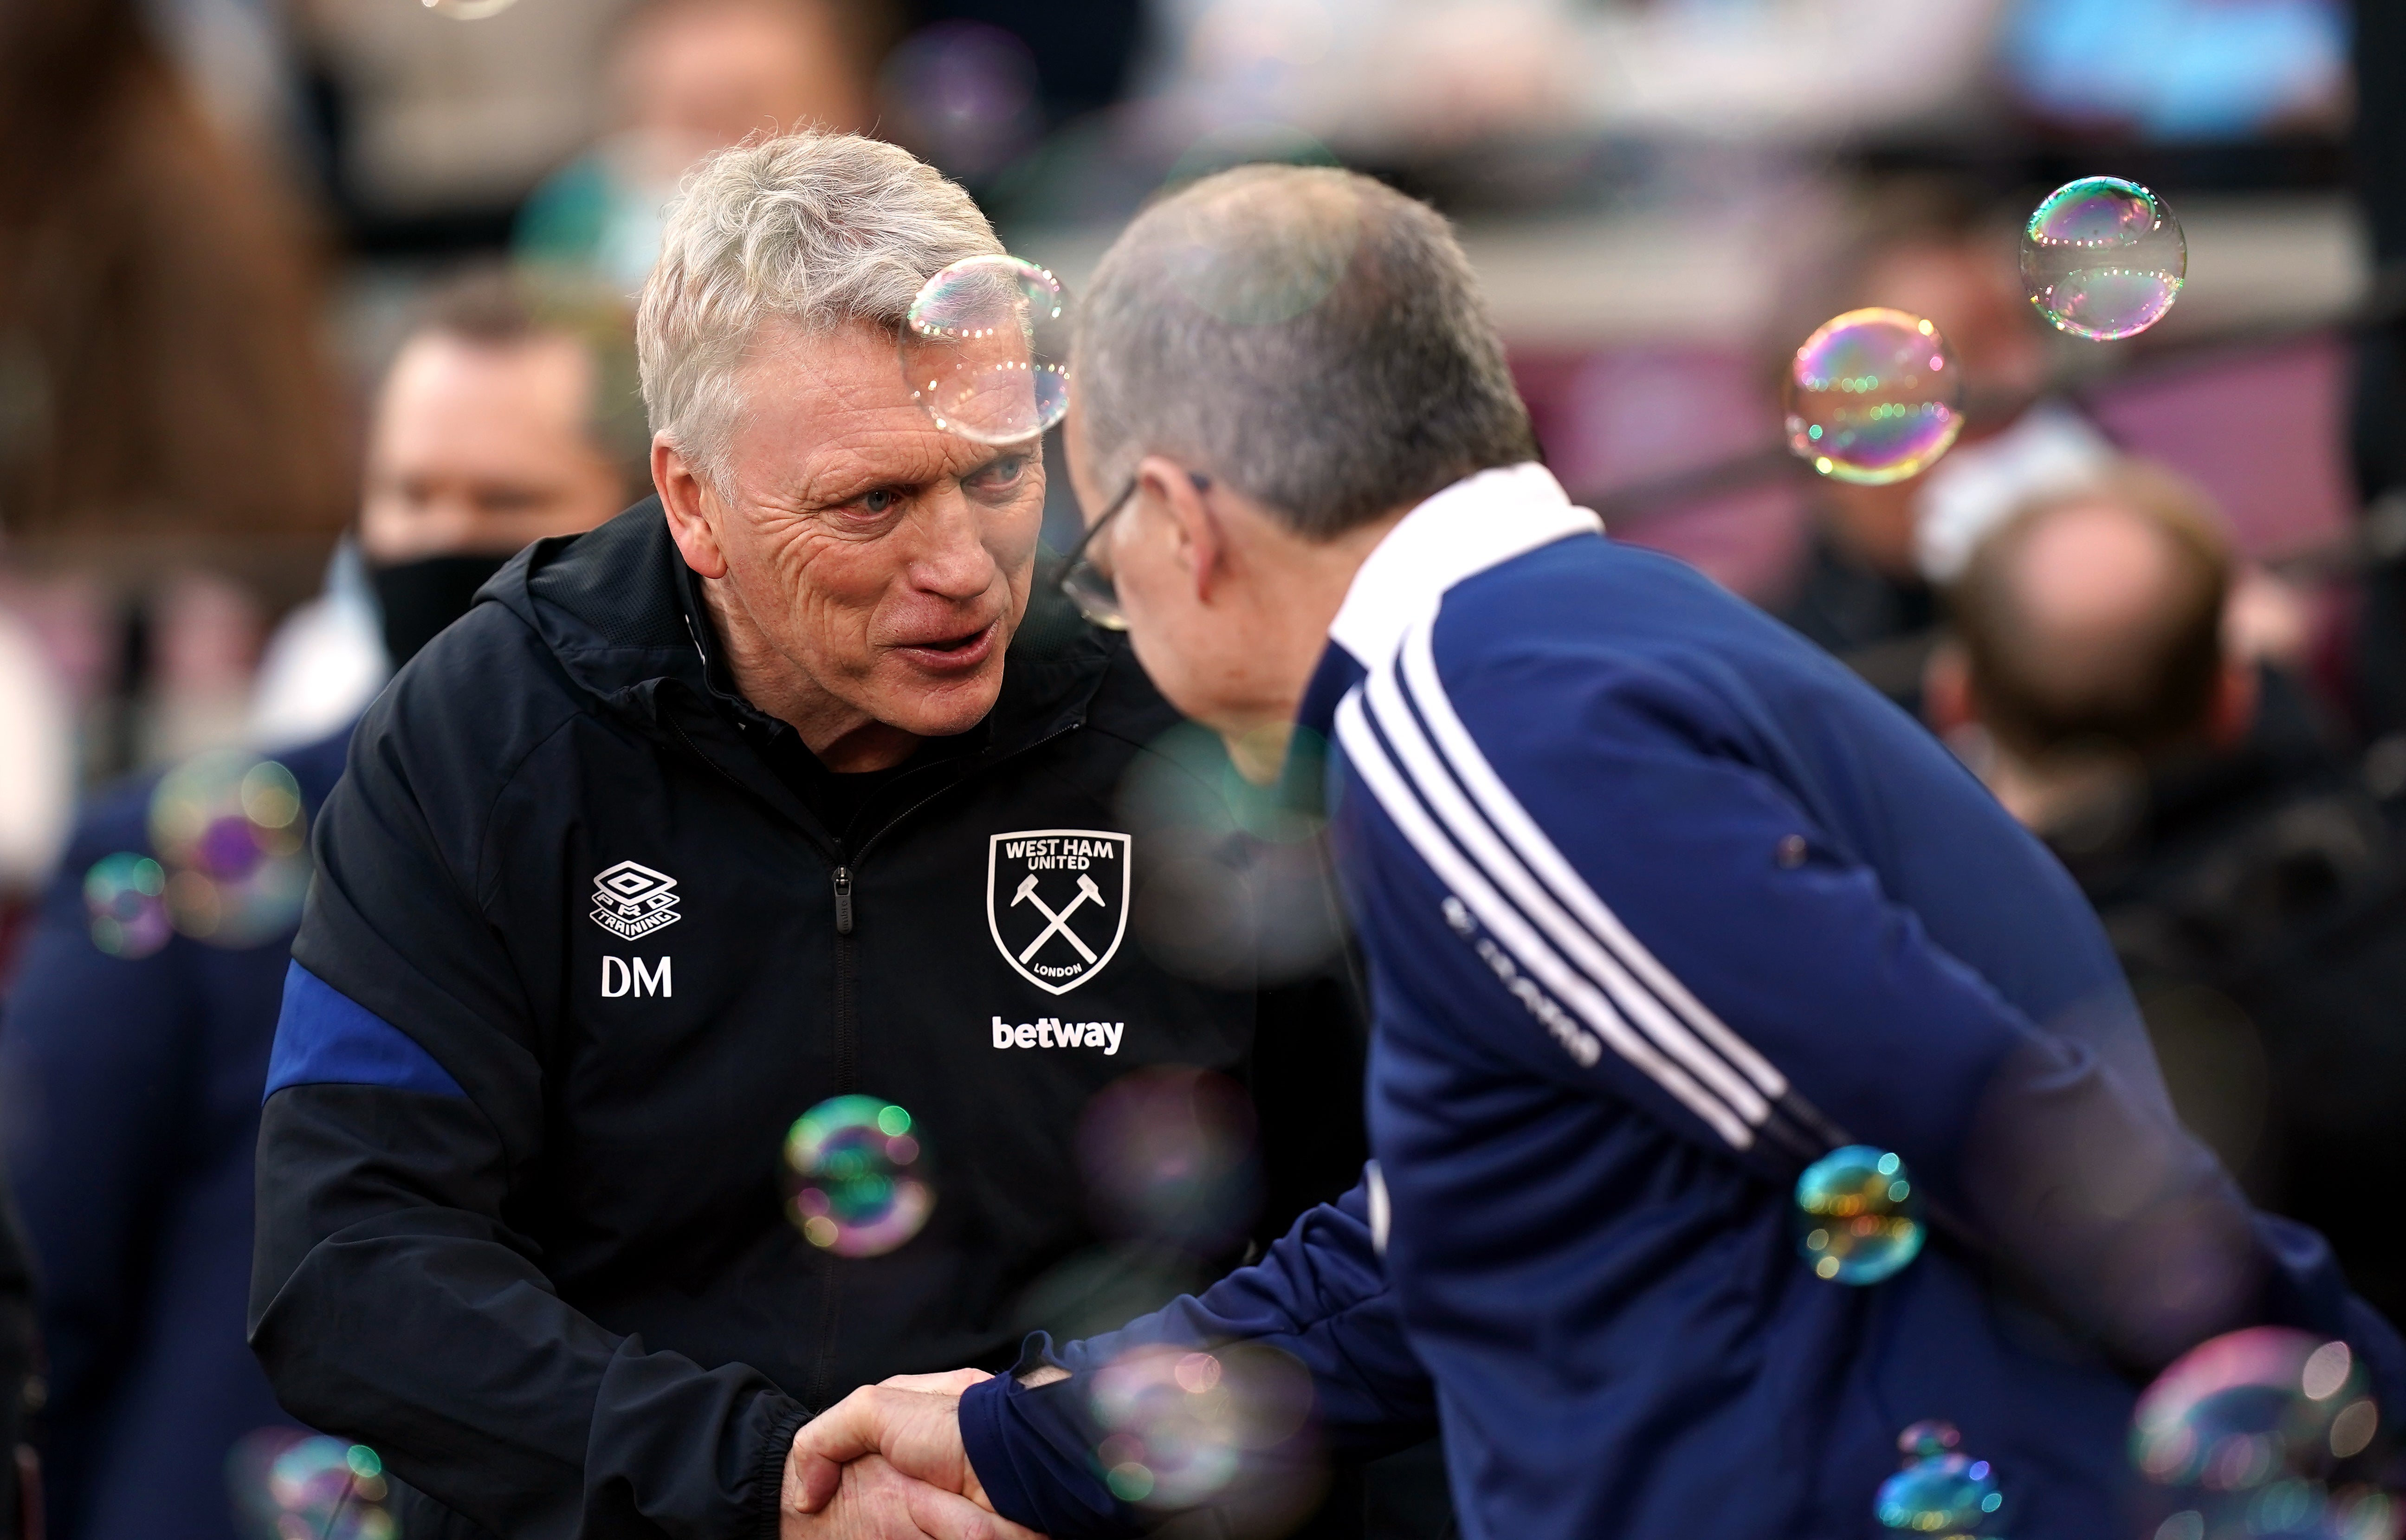 West Ham boss David Moyes and Leeds counterpart Marcelo Bielsa have had contrasting campaigns so far (PA)